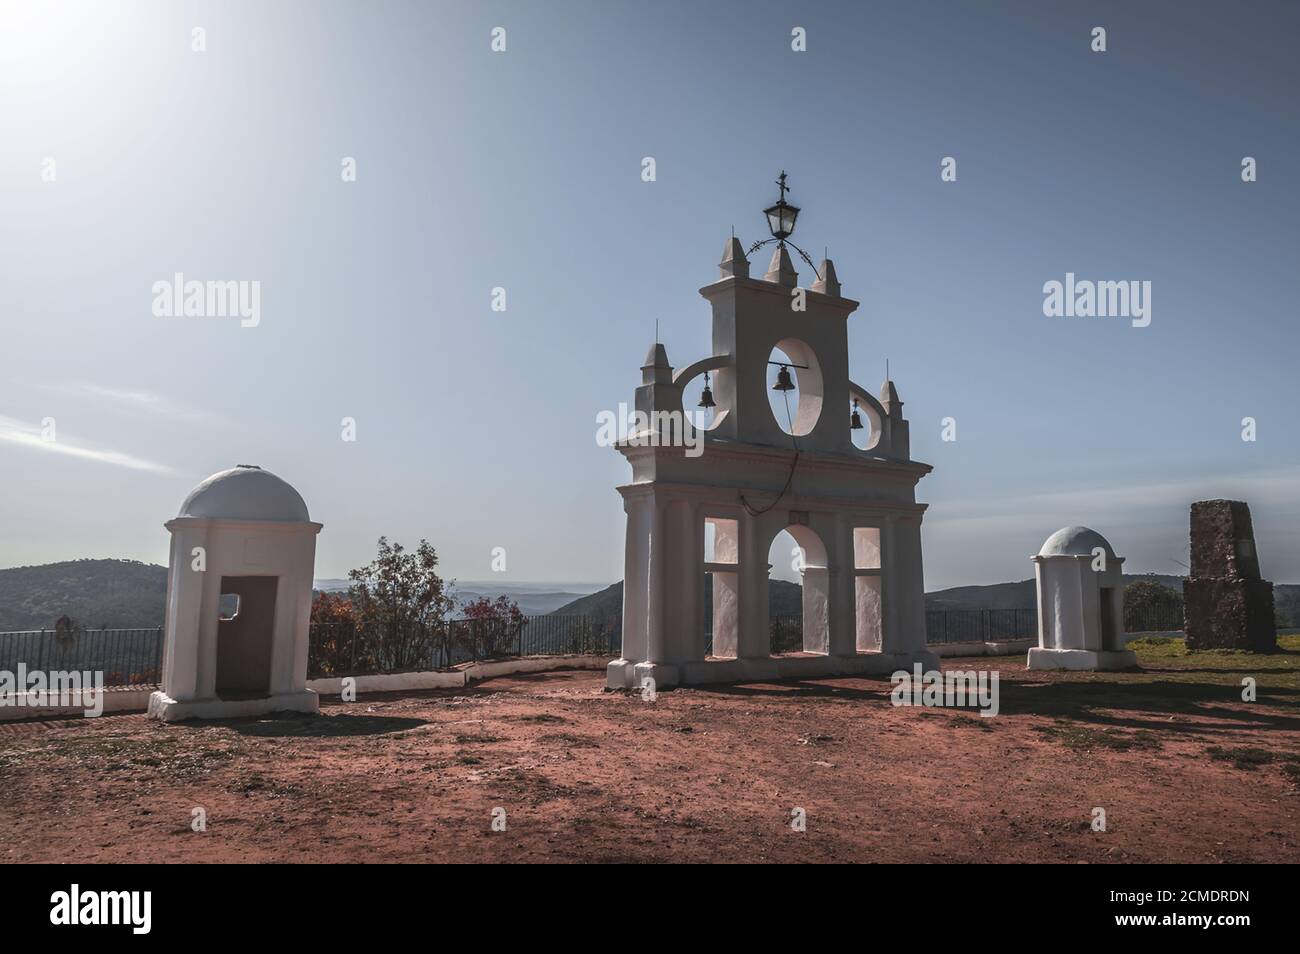 Steeple of the Arias Montano viewpoint Stock Photo